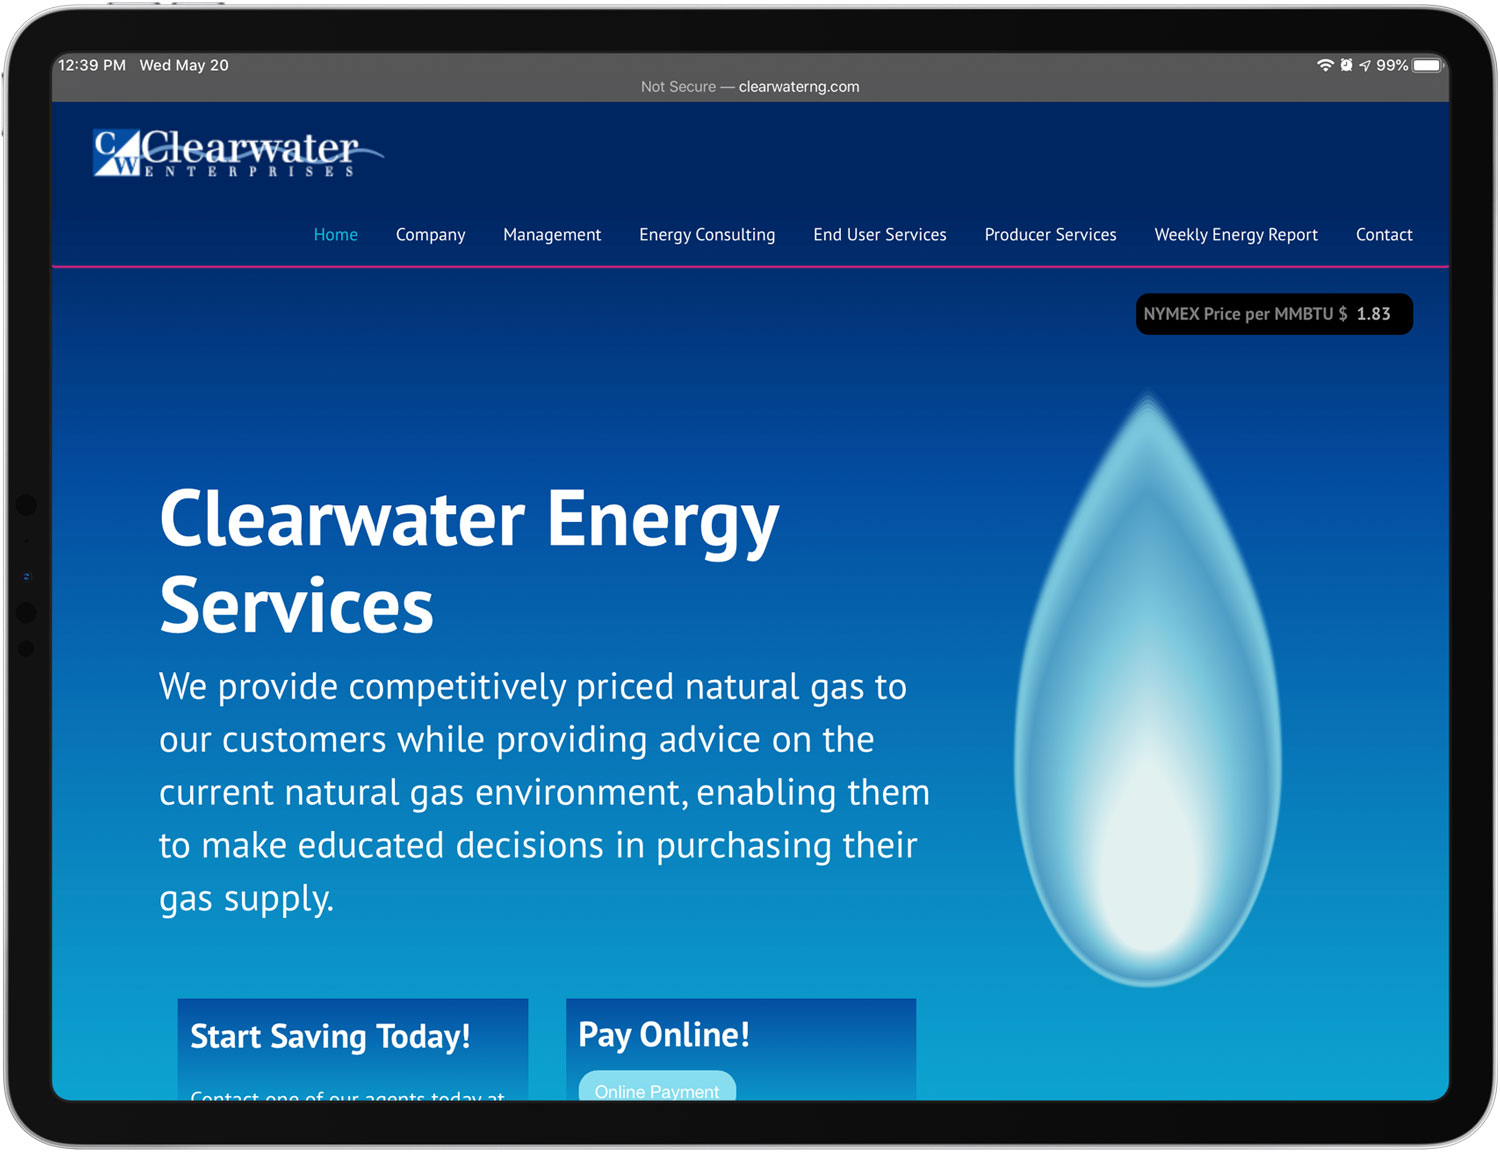 Clearwater Energy Services website